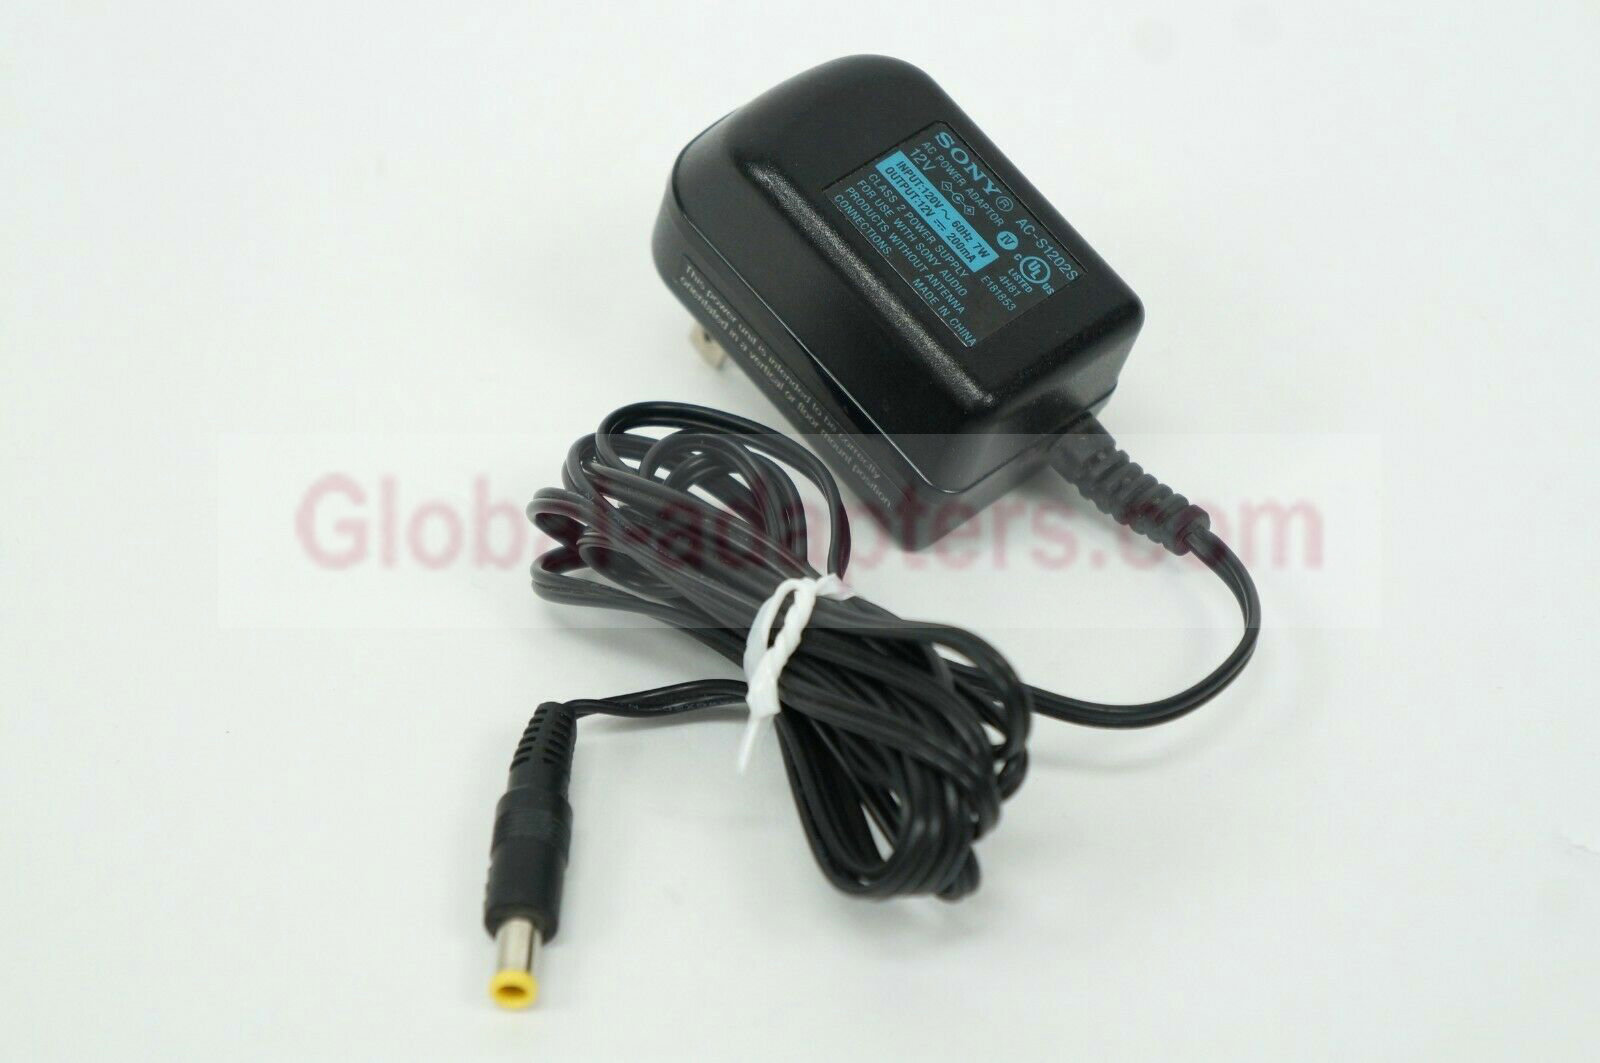 New 12V 200mA Sony AC-S1202S AC Power Supply Wall Adapter - Click Image to Close